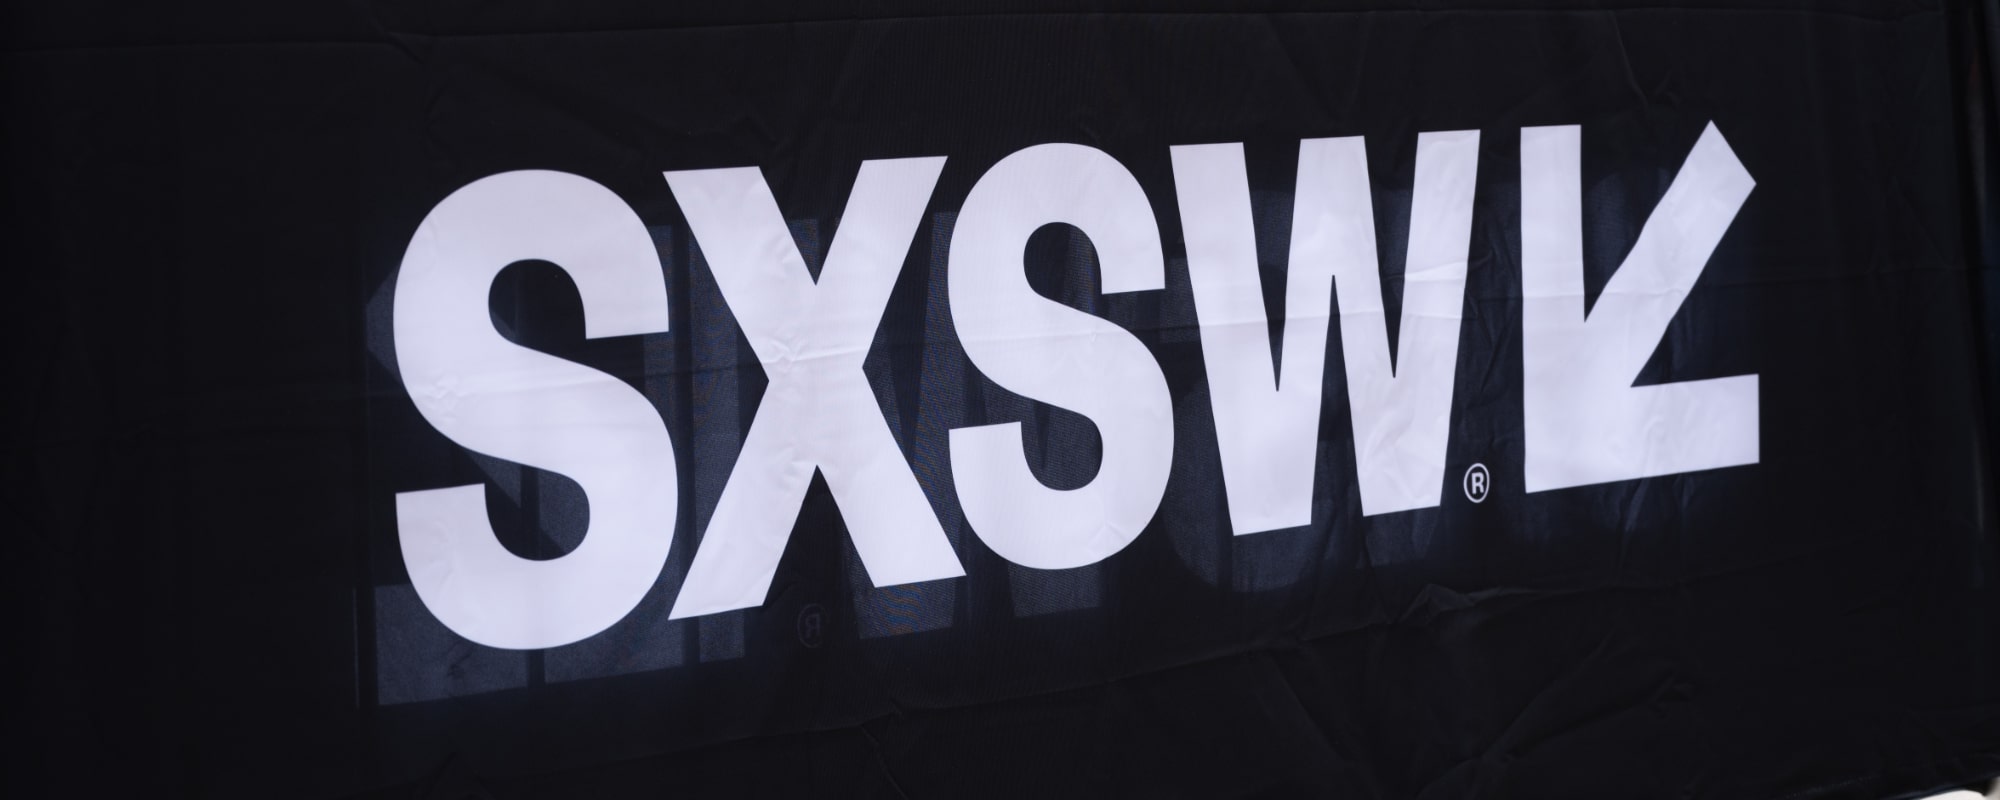 South by Southwest Festival Announces First Wave of Showcasing Artists Including The Pink Stones, Giovannie and the Hired Guns, Horse Jumper of Love, and More